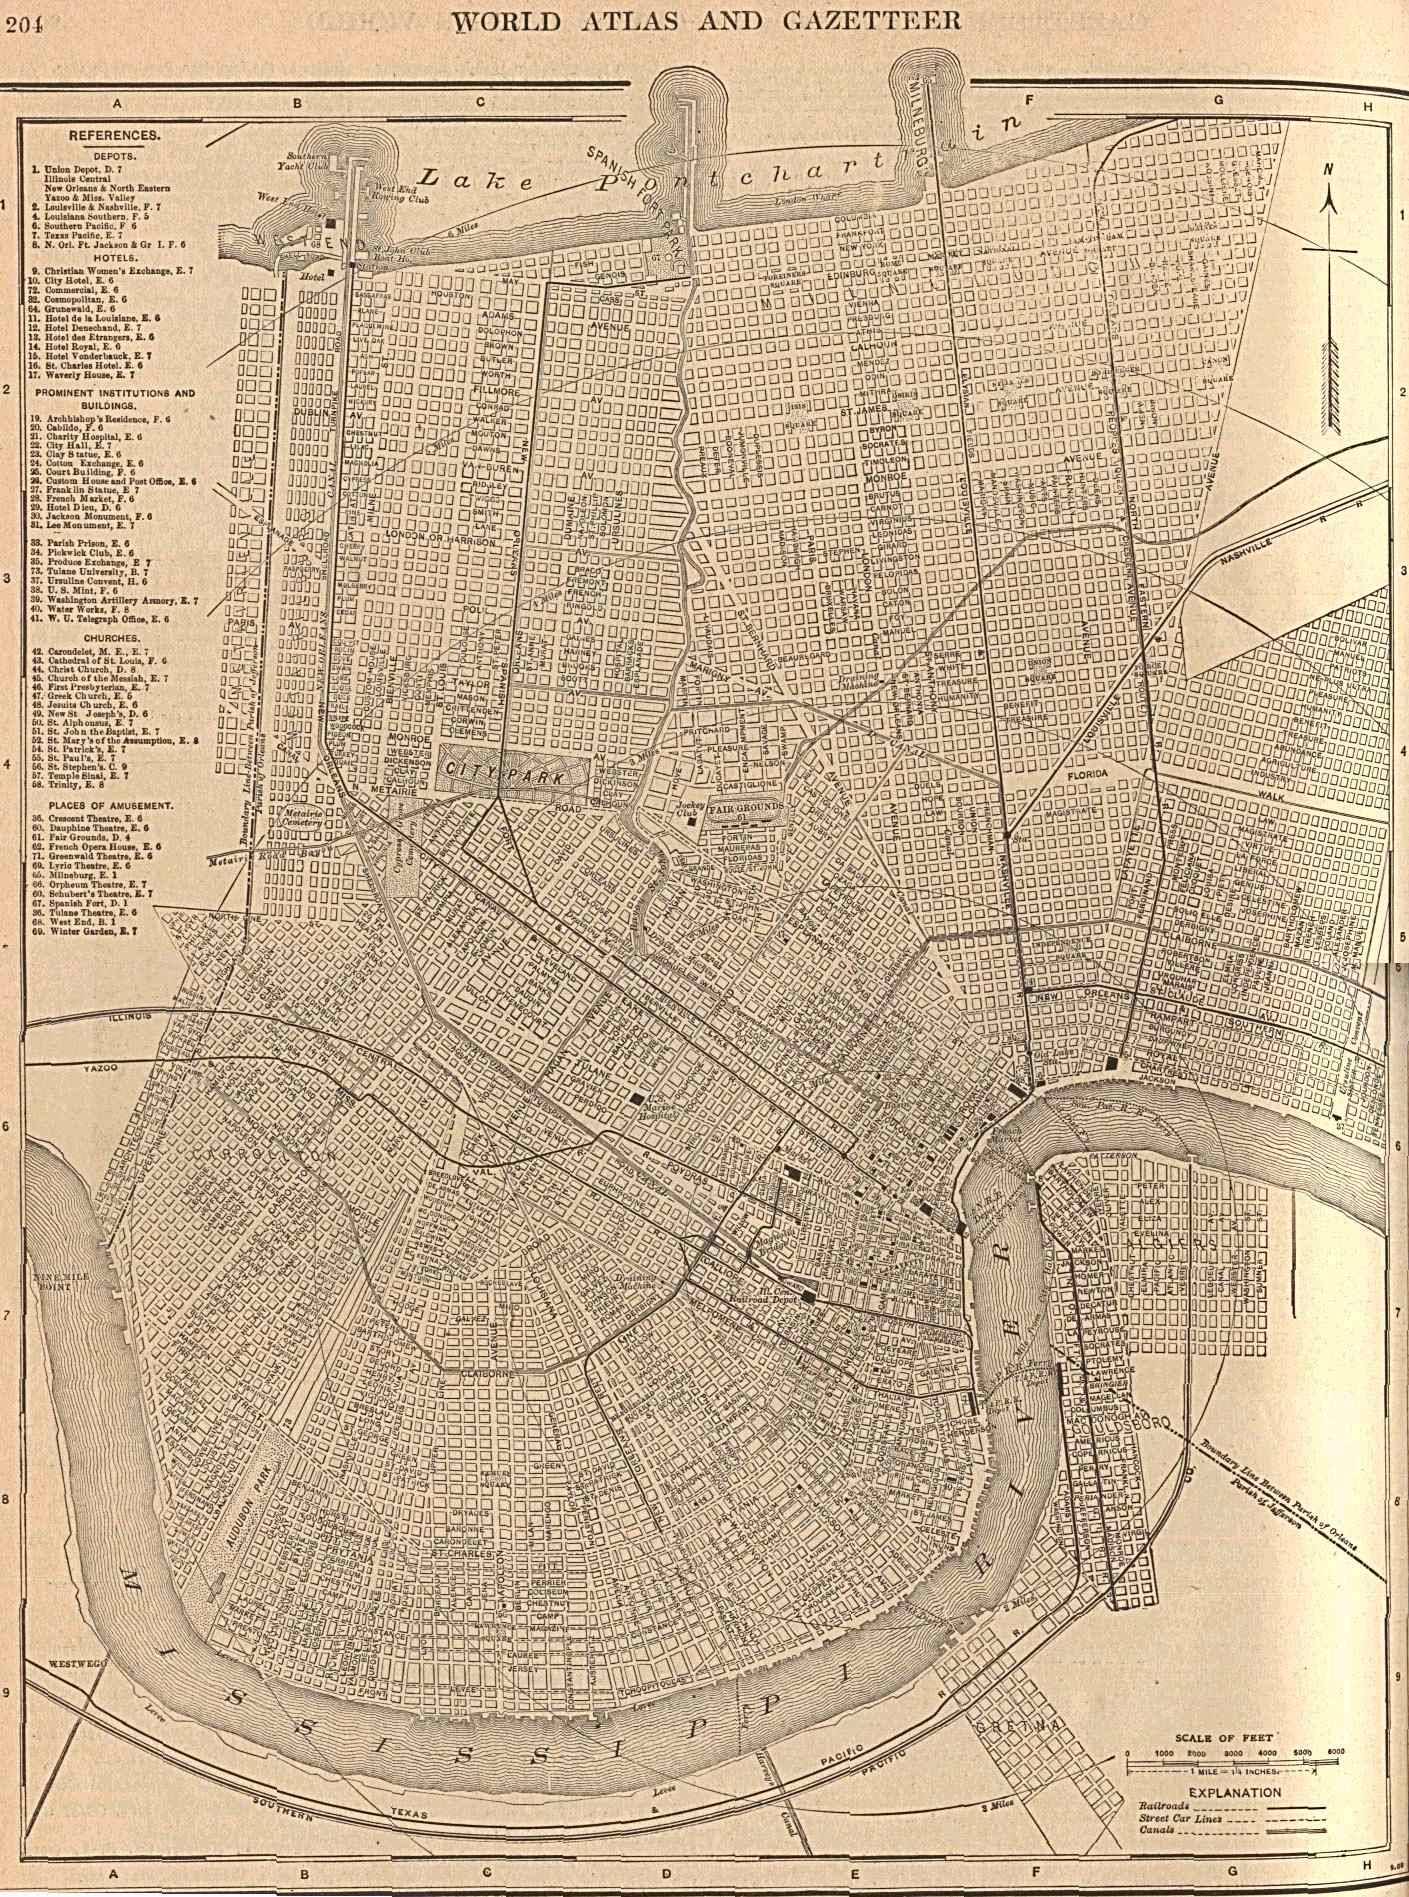 1908 map showing West End, Spanish Fort, & Milneburg.